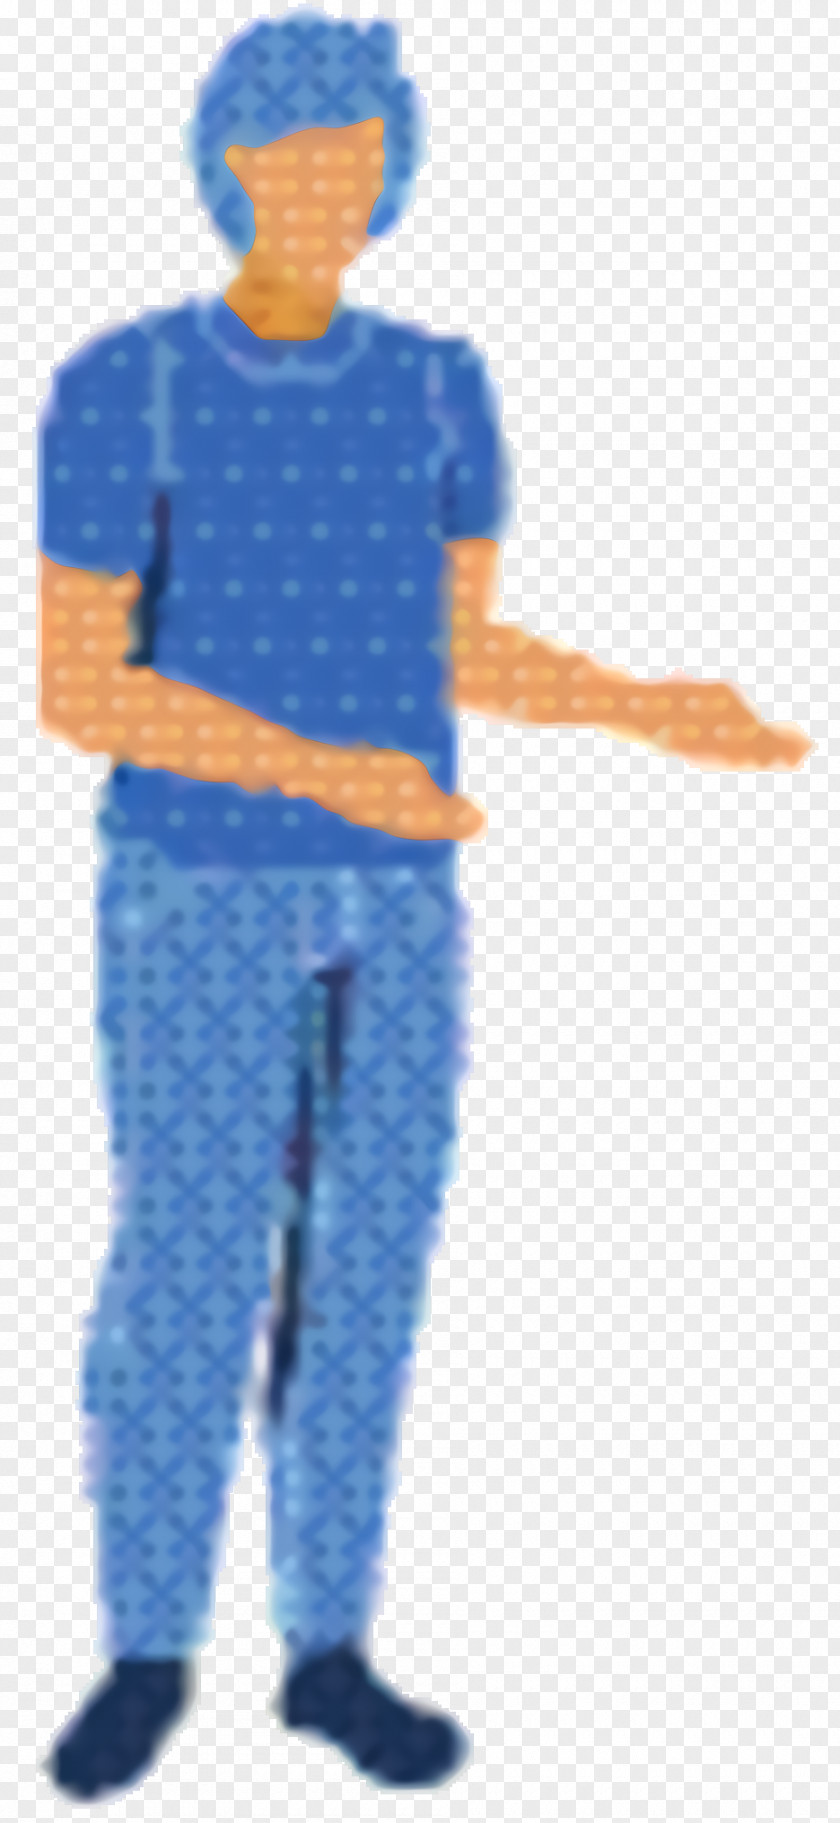 Tshirt Jeans Background PNG